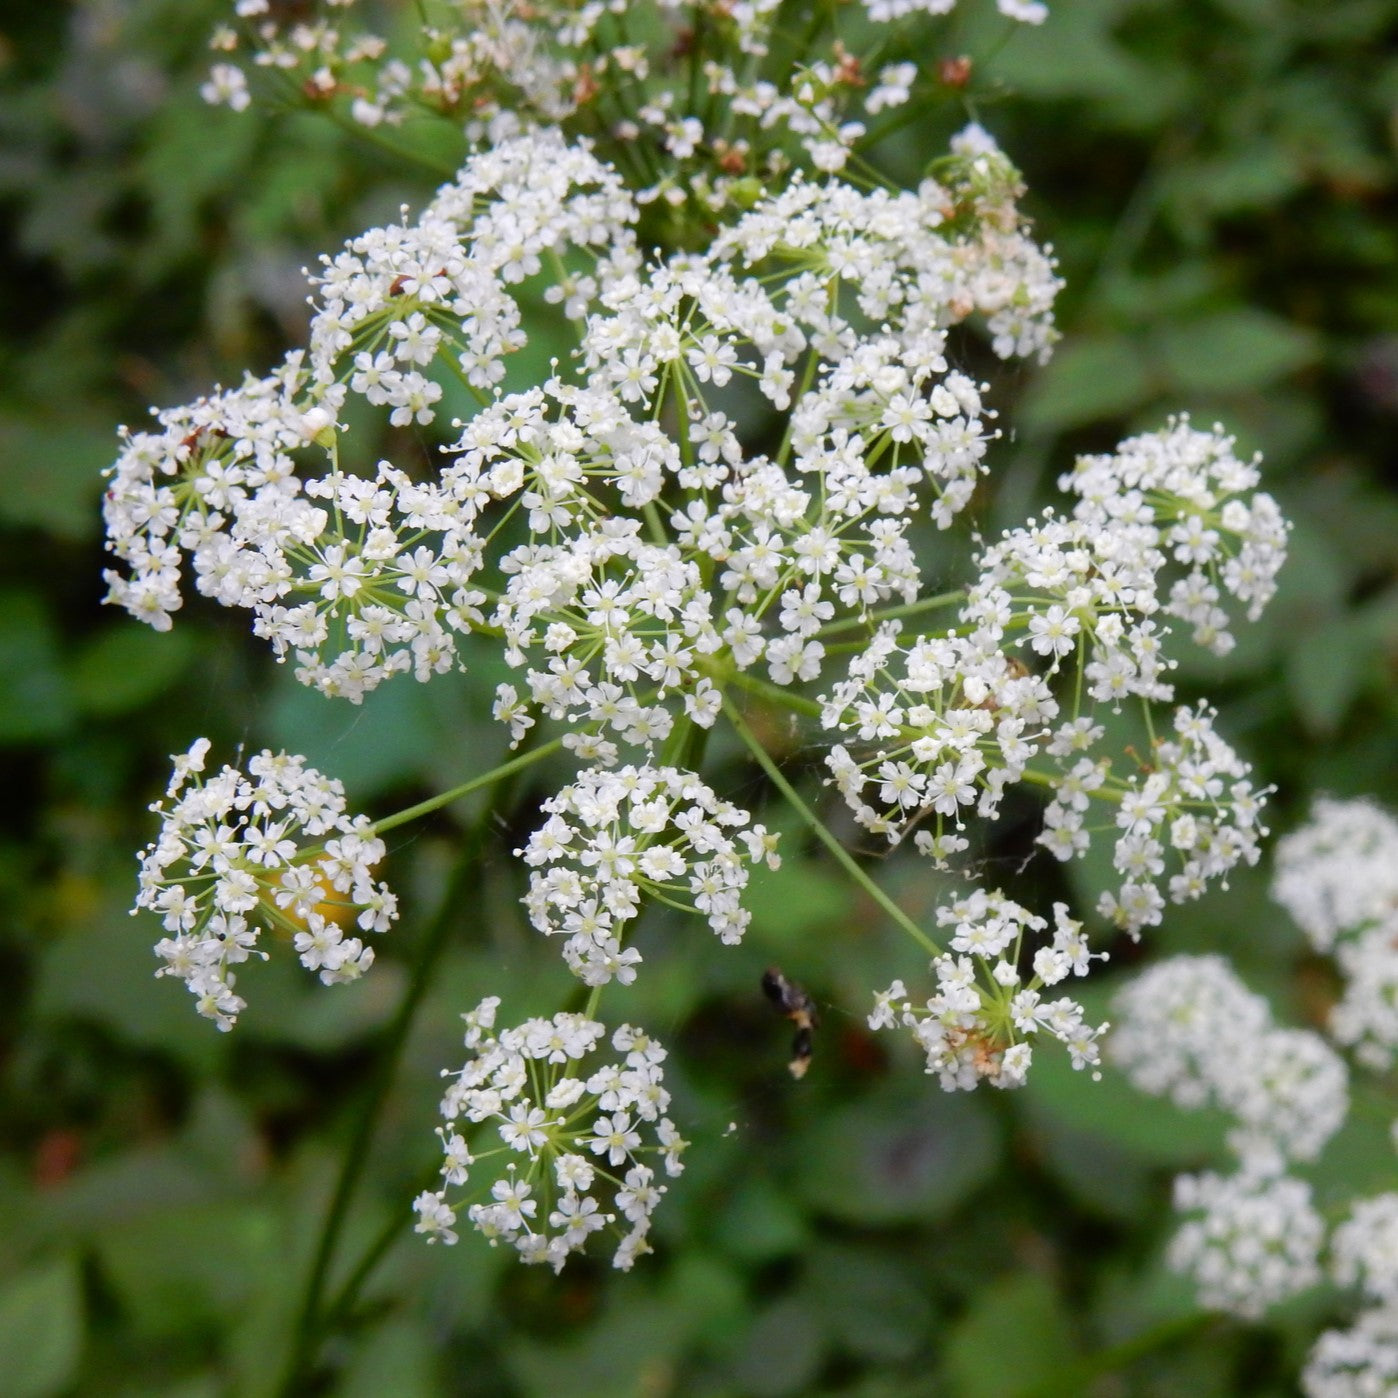 Close-up of a cluster of showy white flowers of celery-leaved lovage (Ligusticum apiifolium). One of approximately 200 species of Pacific Northwest native plants available at Sparrowhawk Native Plants, Native Plant Nursery in Portland, Oregon.